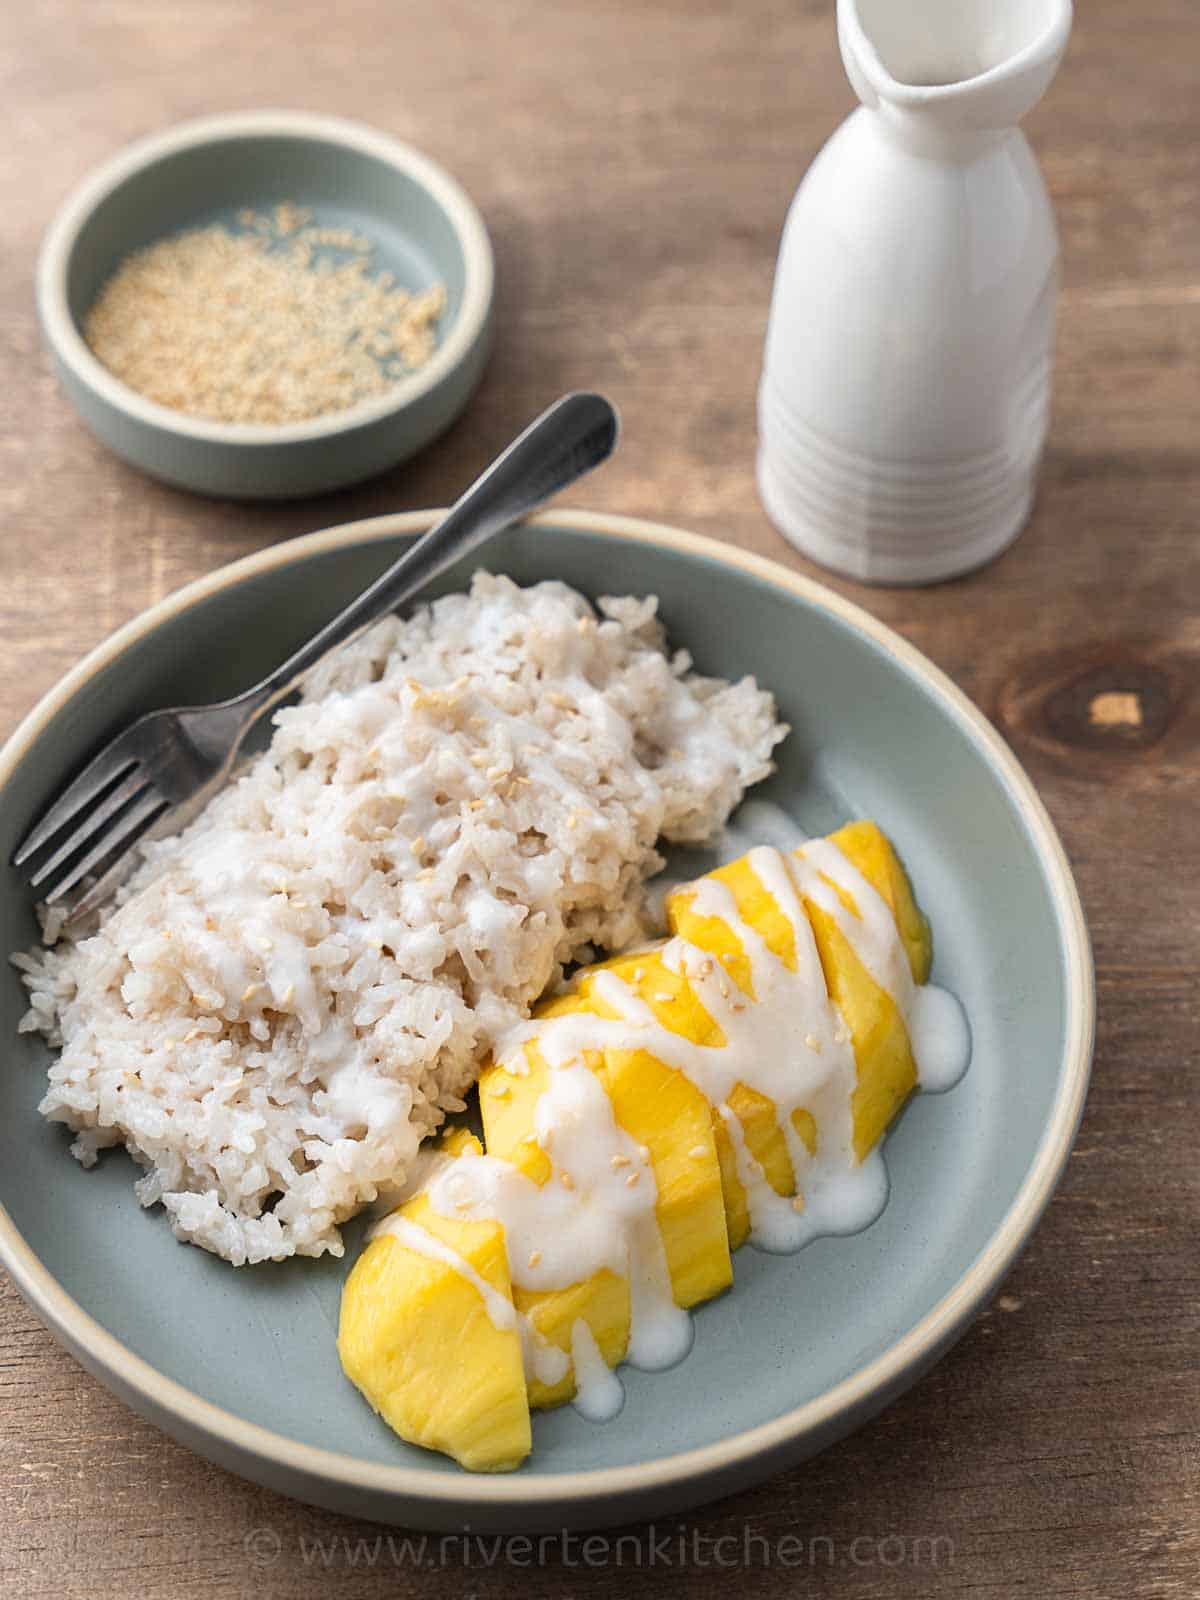 Glutinous rice with mango and coconut sauce in a light blue plate.